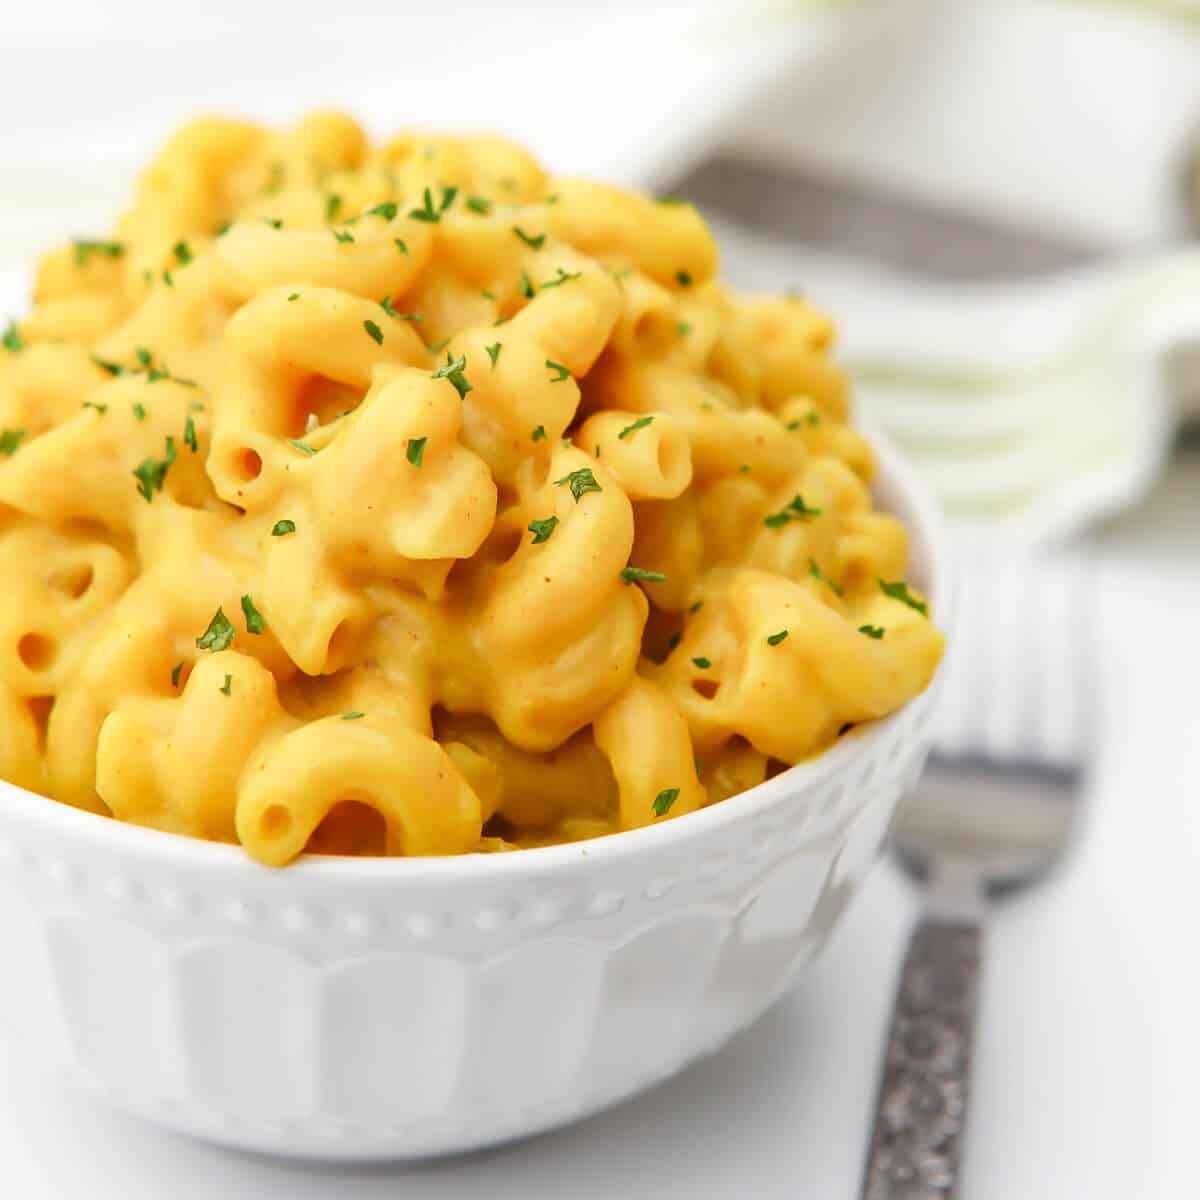 Macaroni and cheese or simply put mac and cheese is a dish known to everyon...